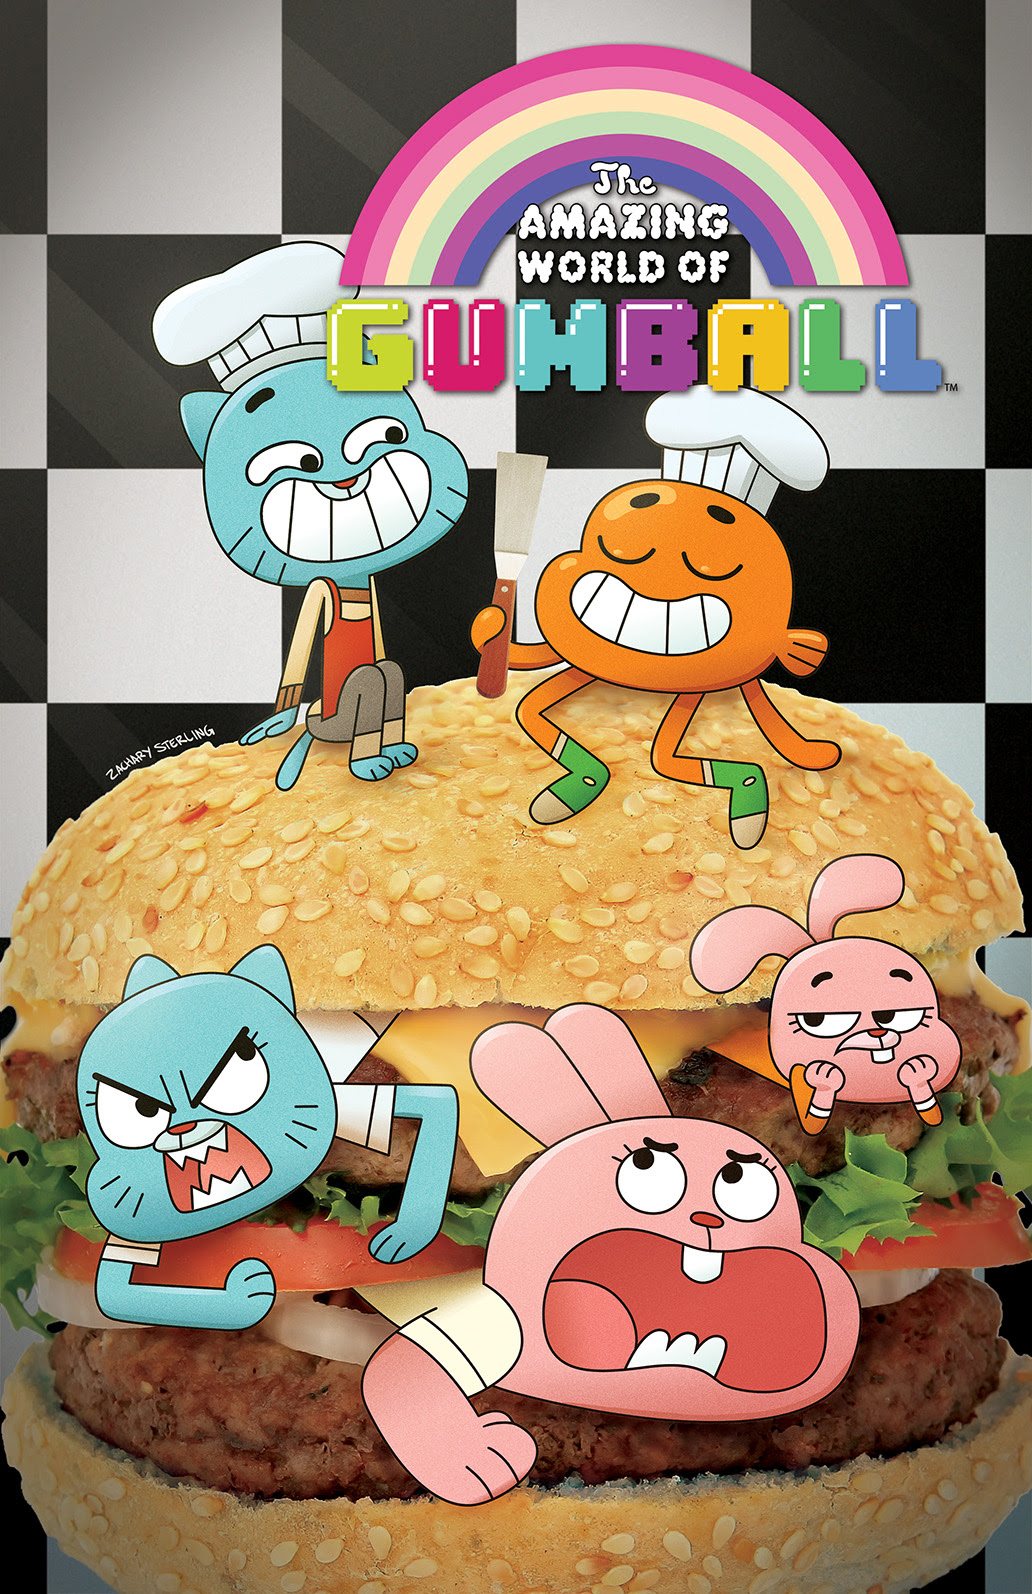 The Amazing World of Gumball #1 Cover B